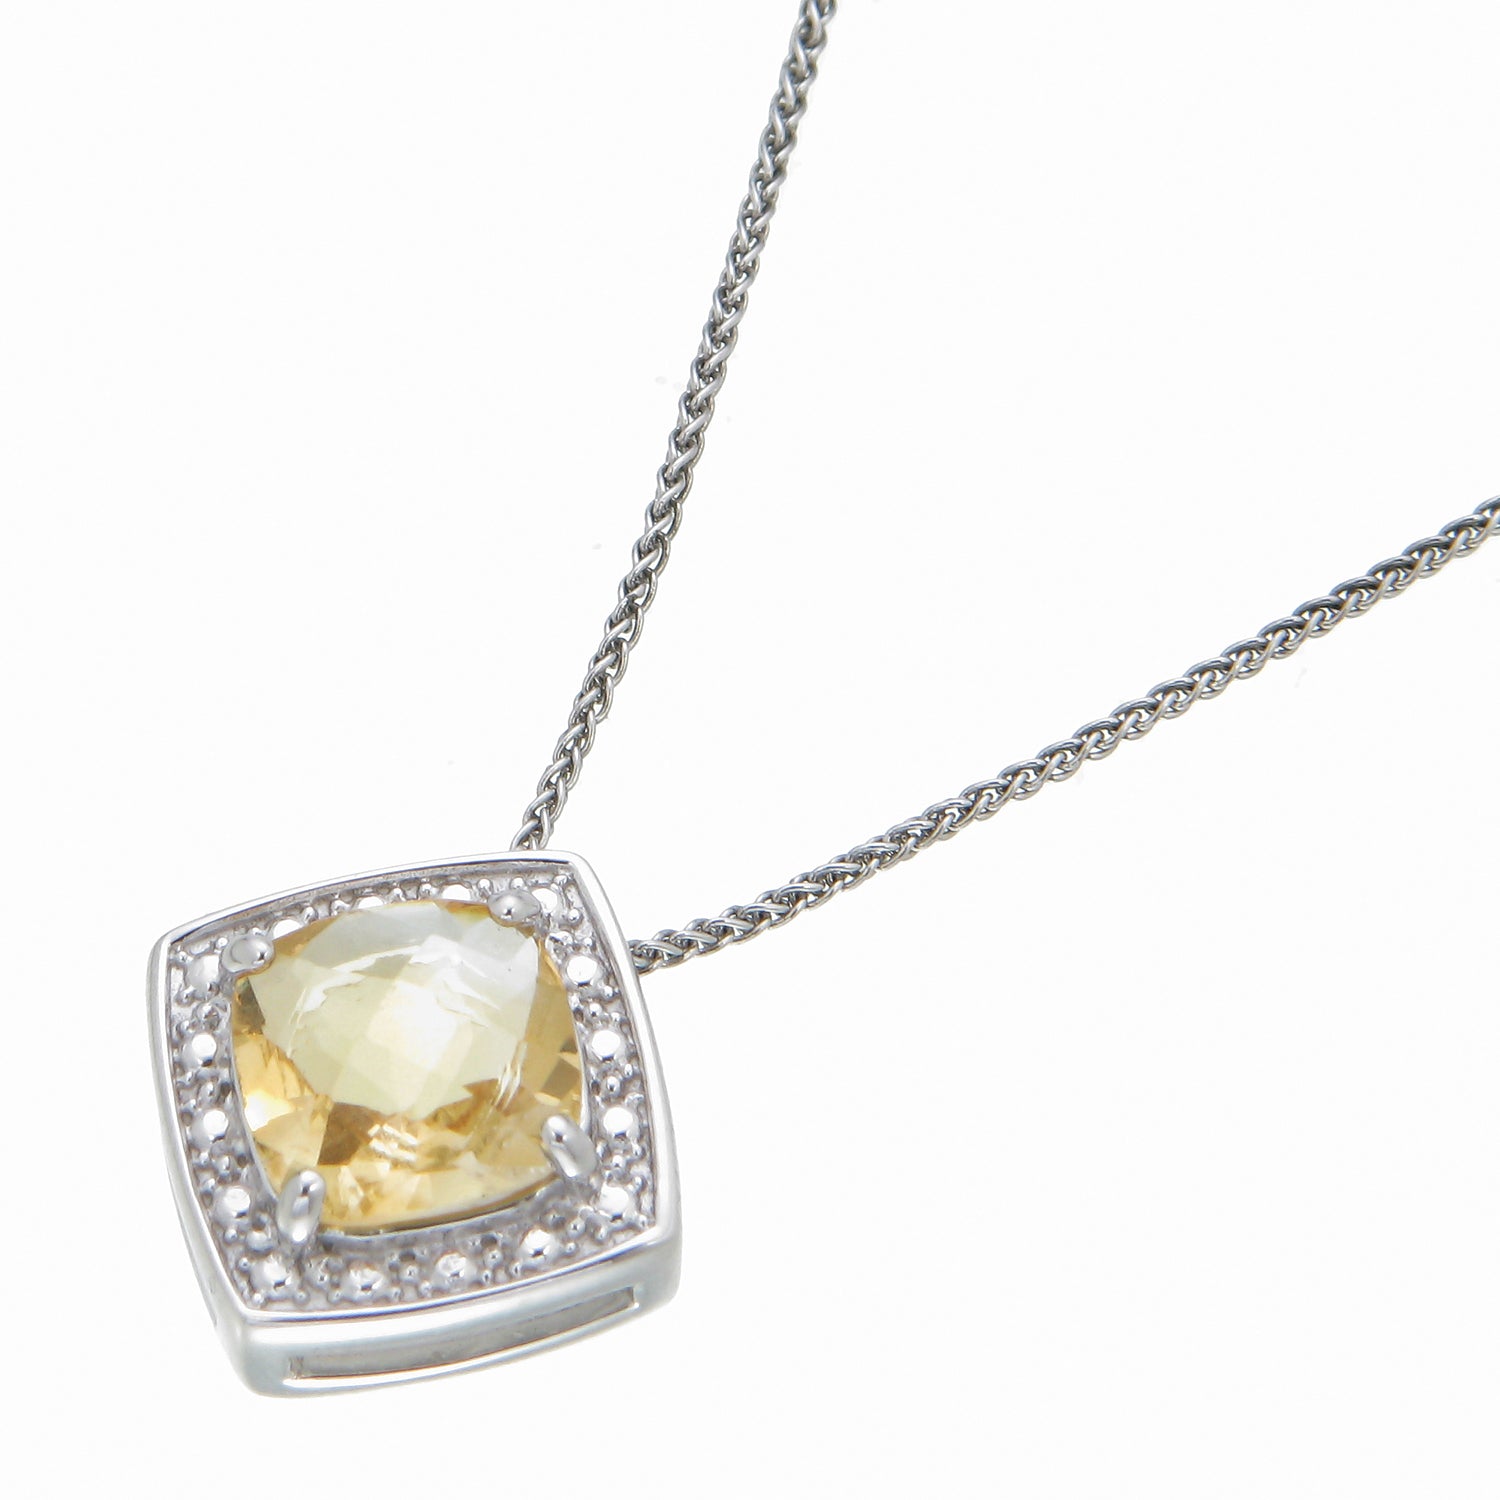 2 cttw Pendant Necklace, Cushion Cut Citrine Pendant Necklace for Women in .925 Sterling Silver with Rhodium, 18 Inch Chain, Prong Setting